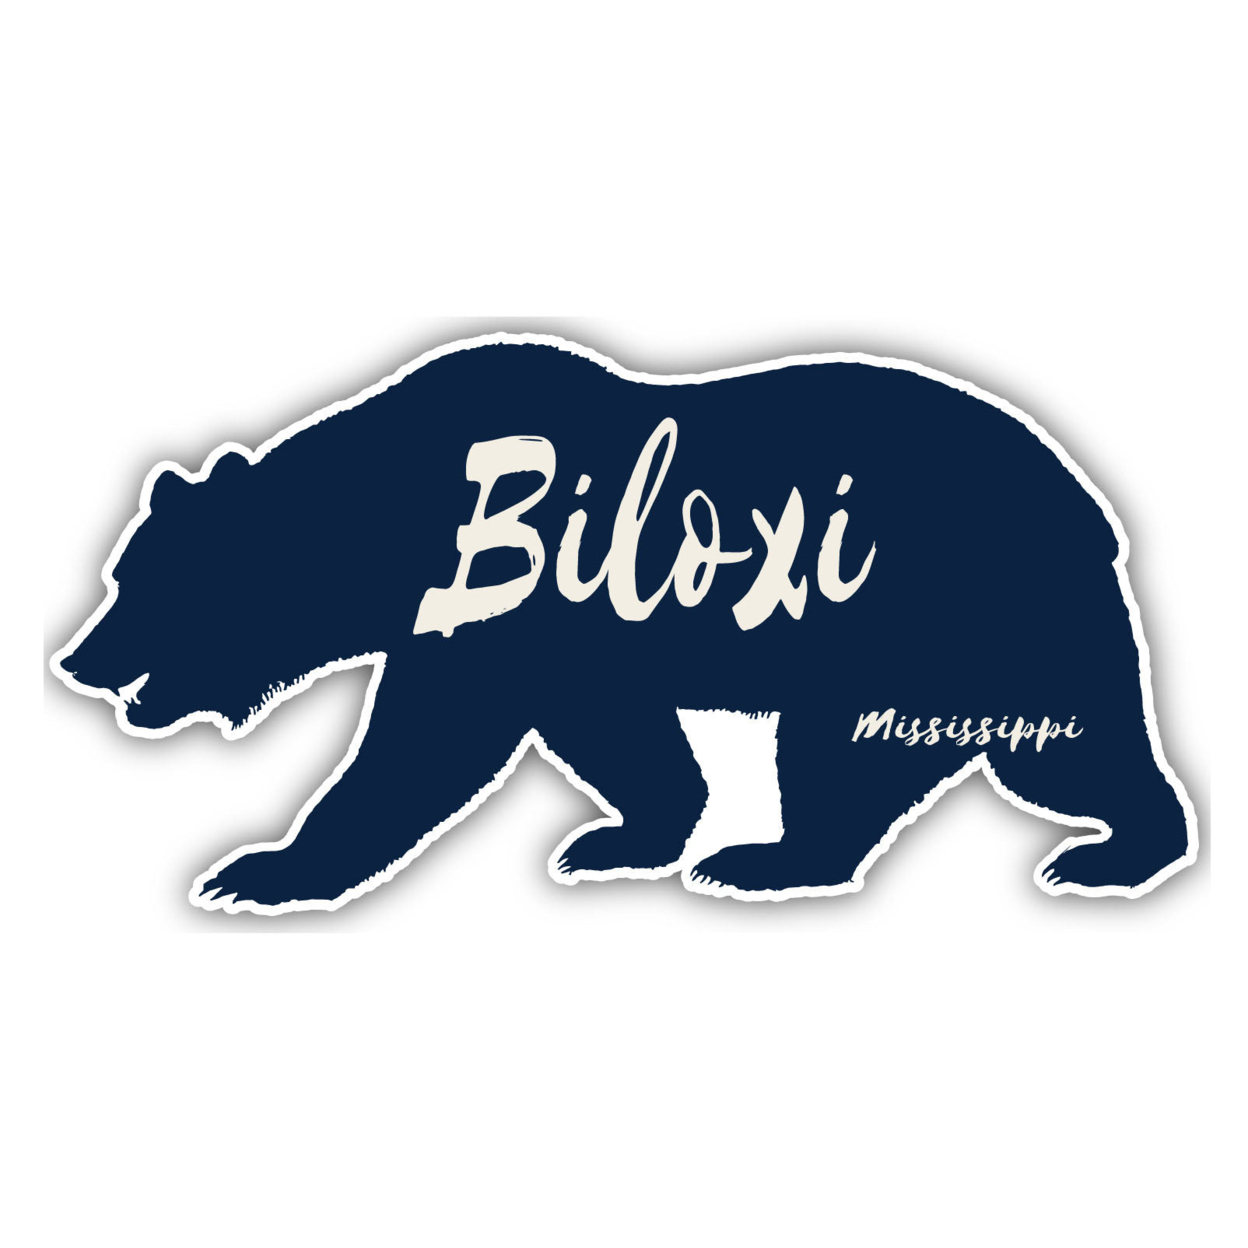 Biloxi Mississippi Souvenir Decorative Stickers (Choose Theme And Size) - 4-Pack, 2-Inch, Tent